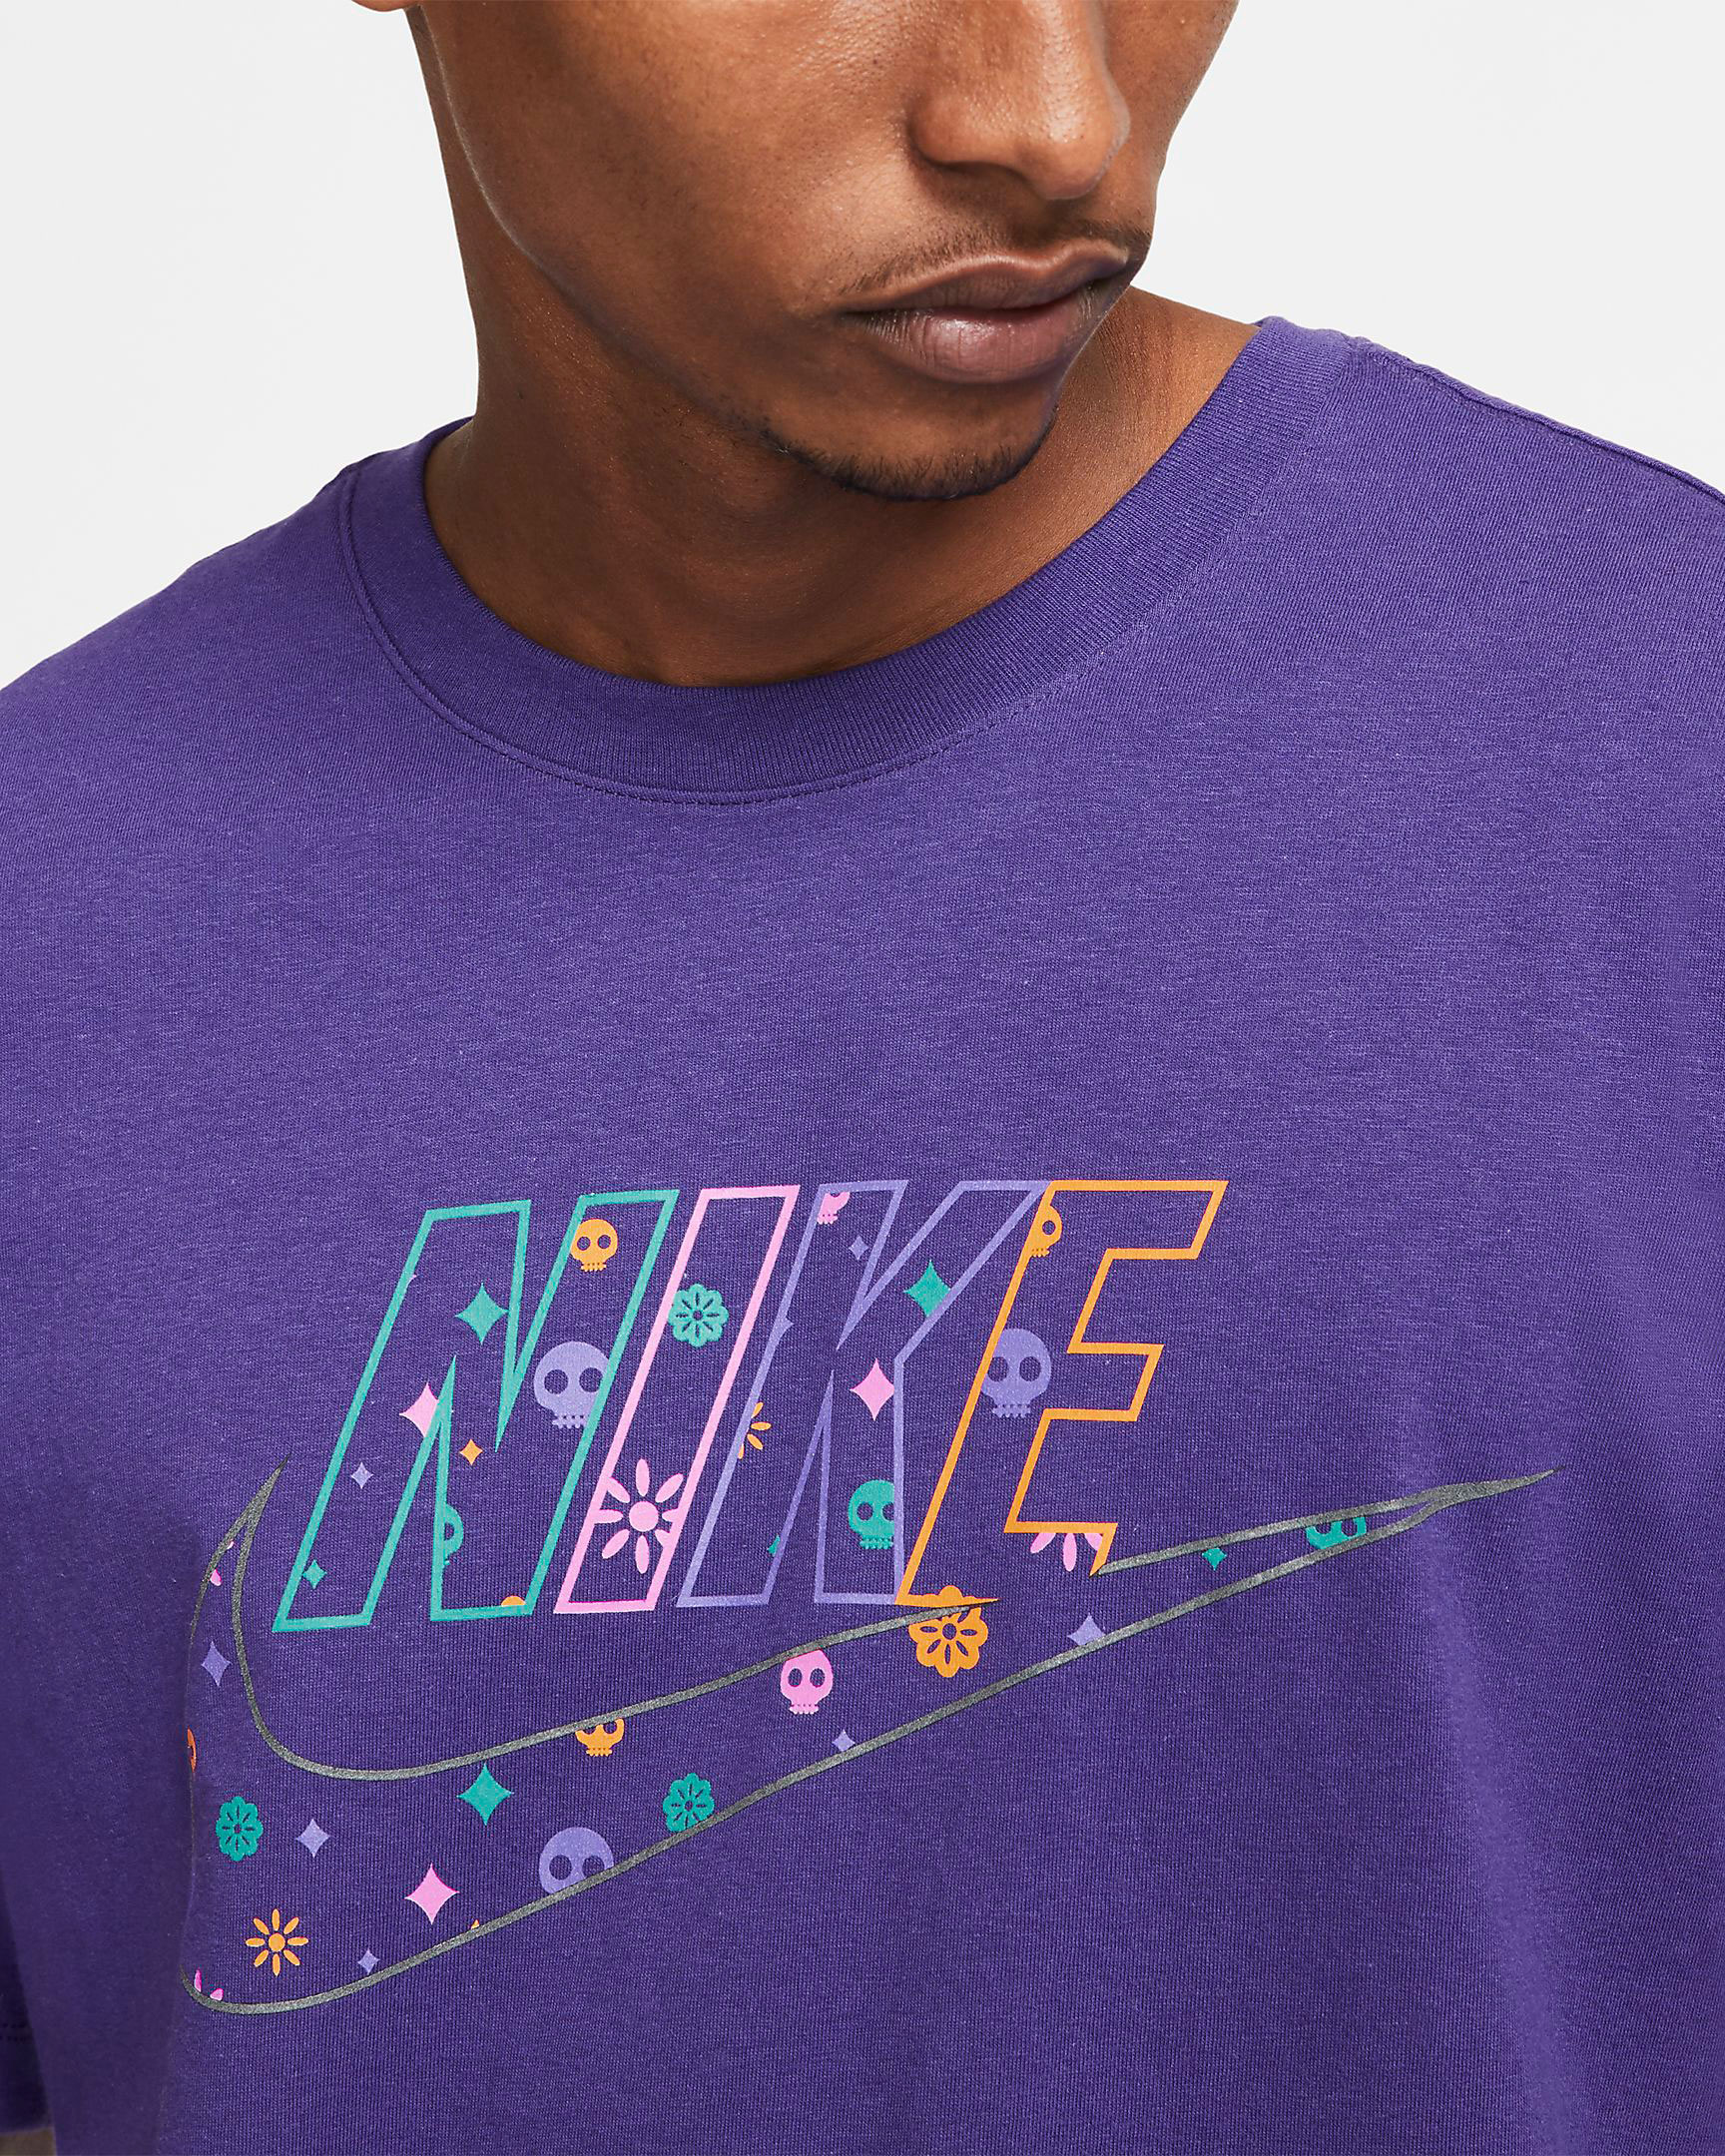 nike day of the dead long sleeve